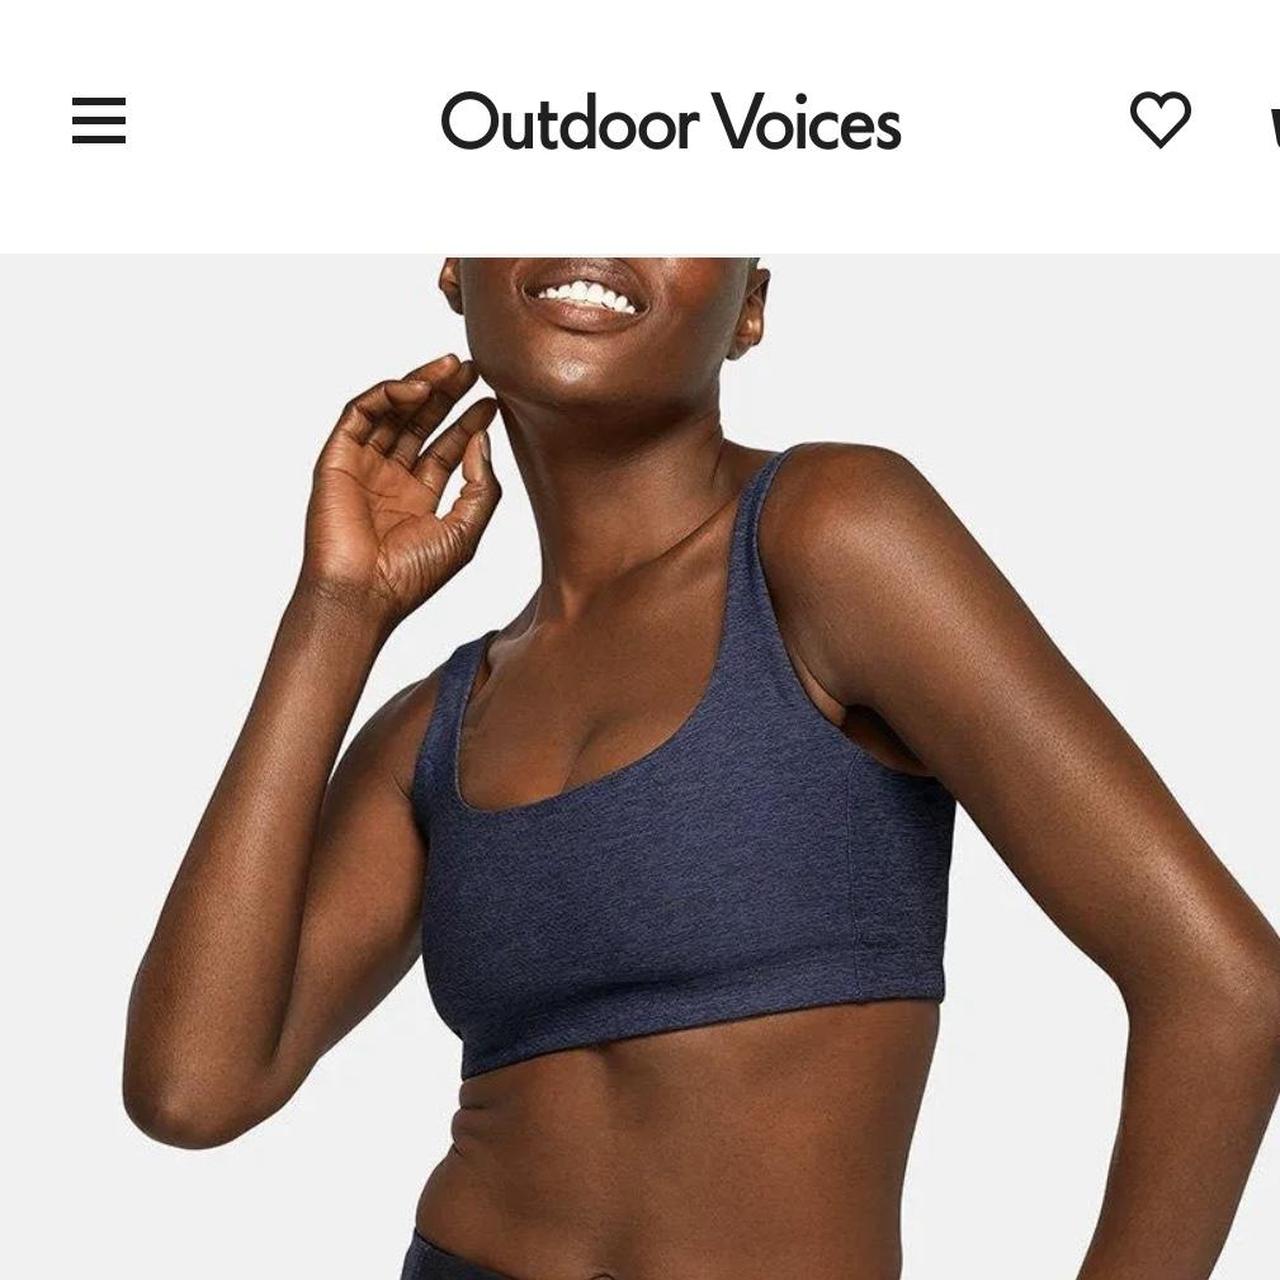 Outdoor voices double time bra in black (color - Depop